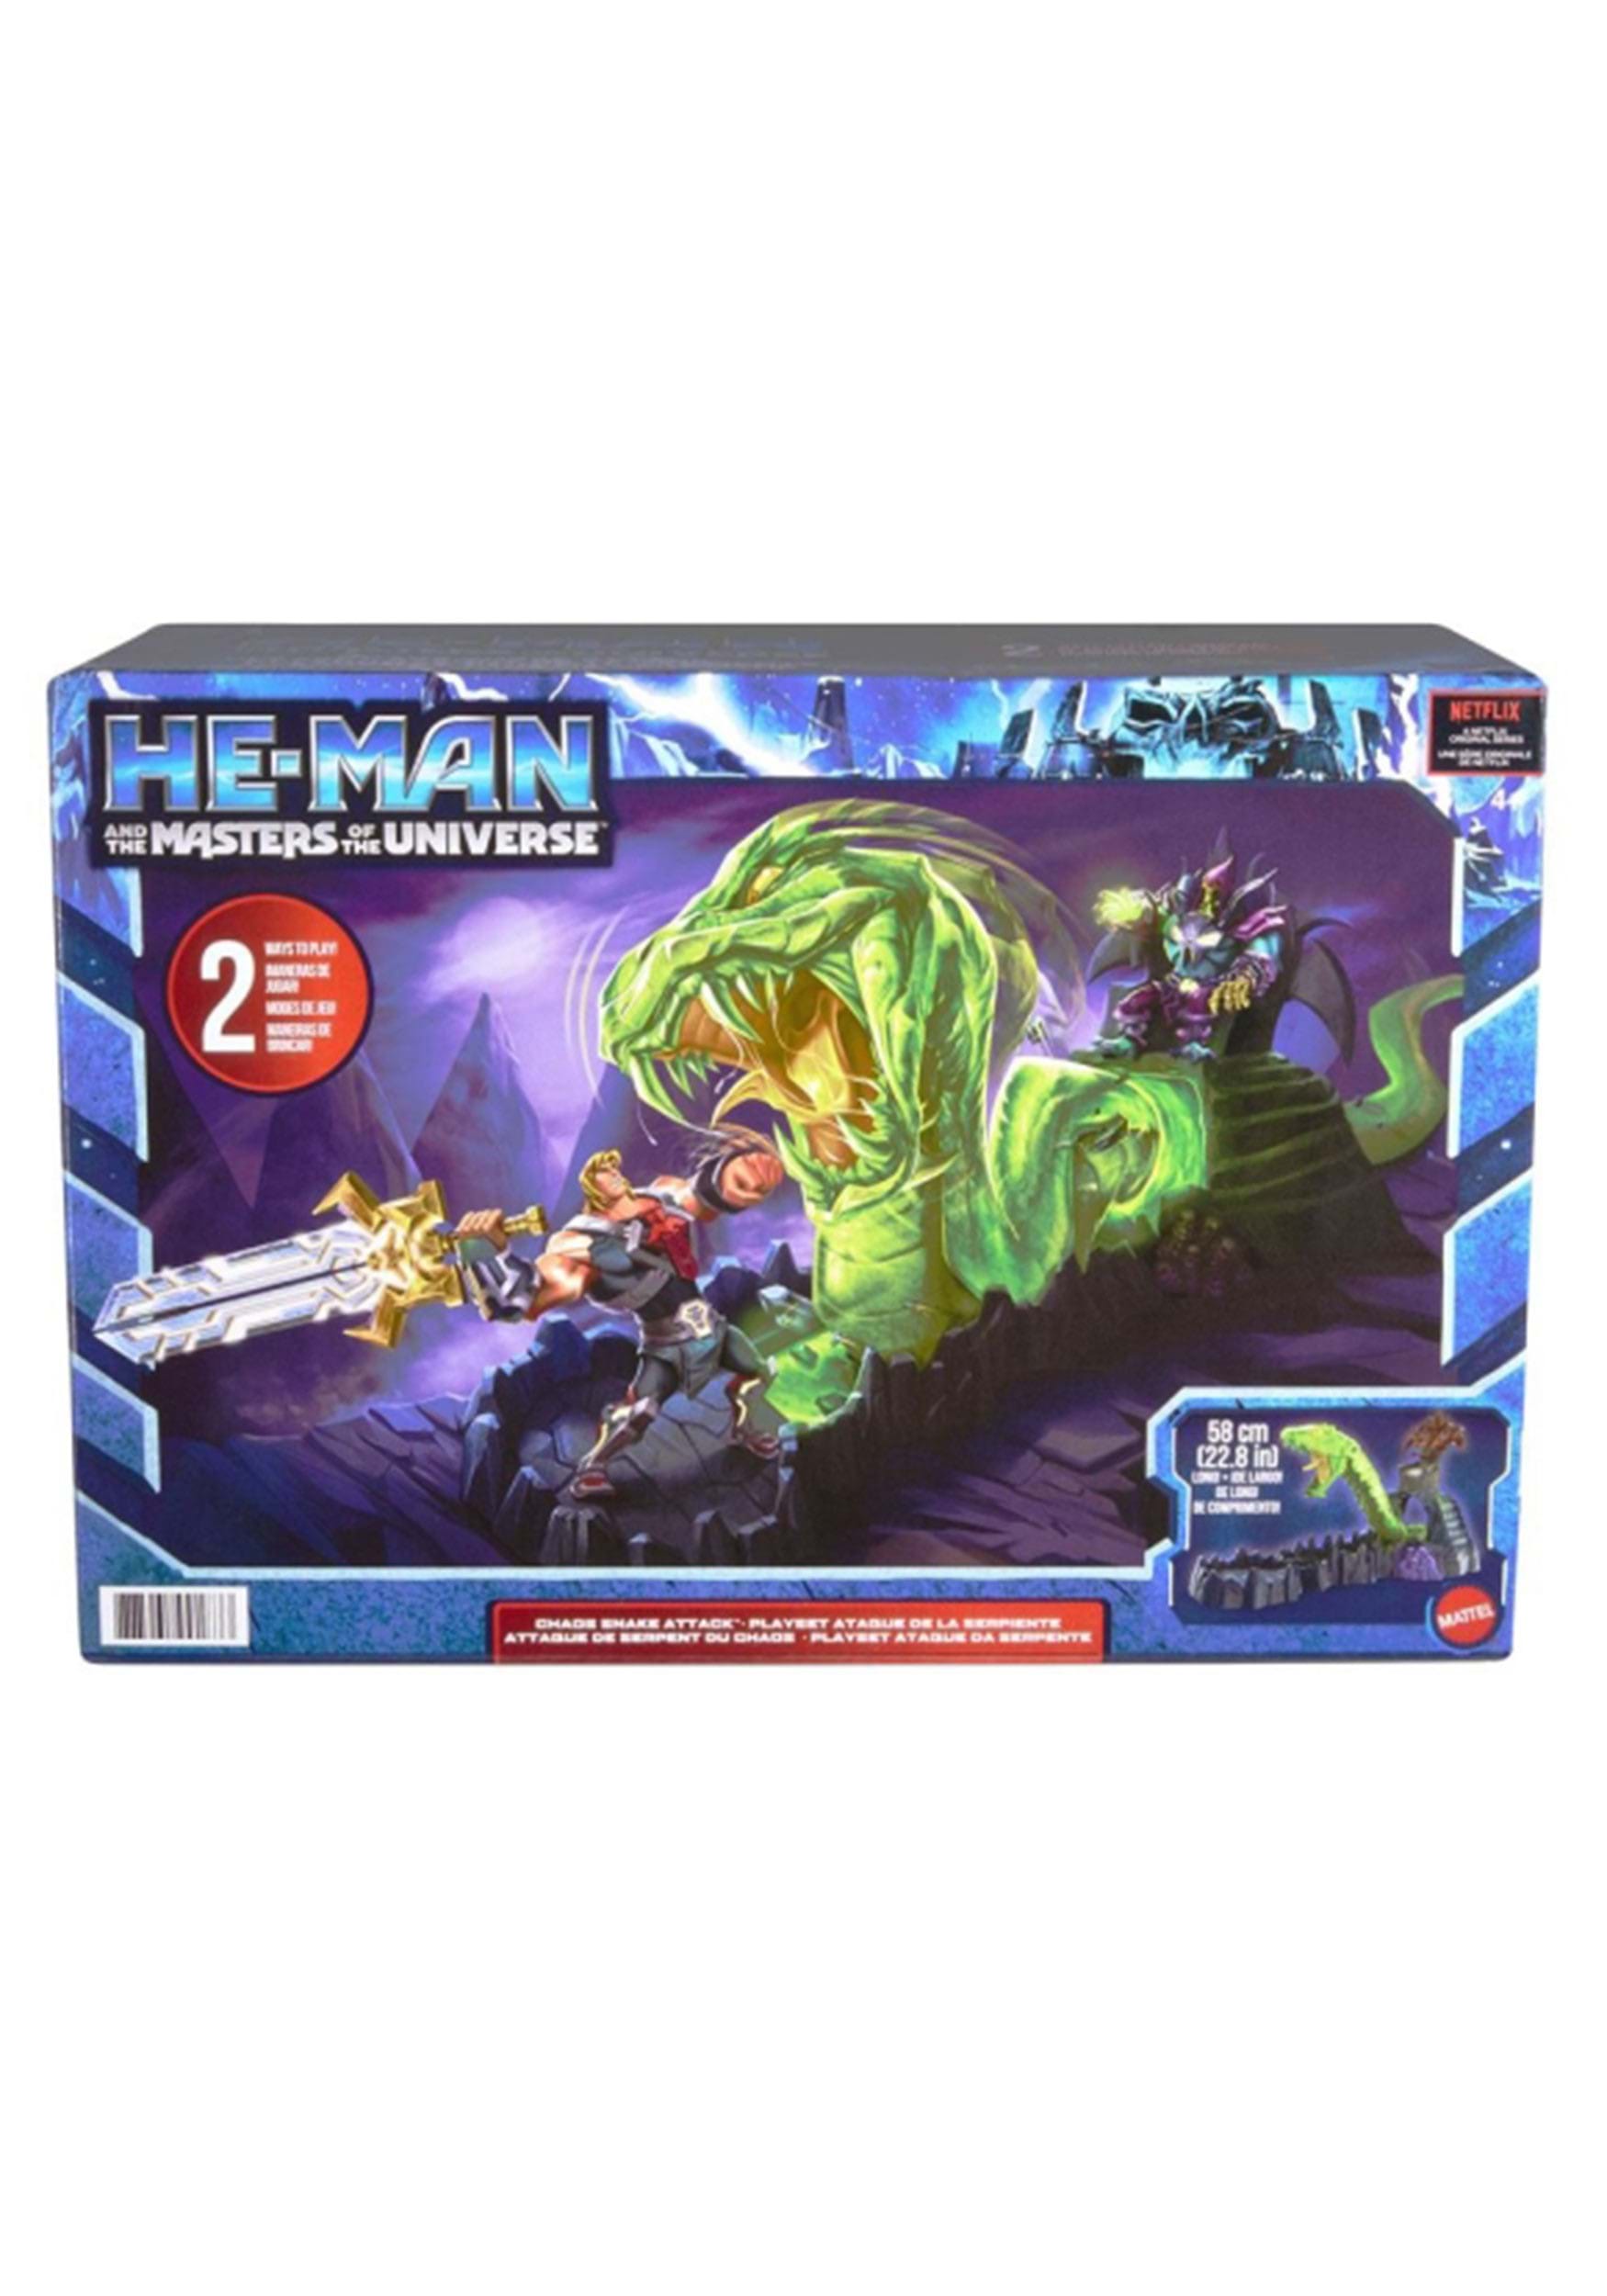 He-Man & Masters of the Universe Chaos Snake Attack Playset